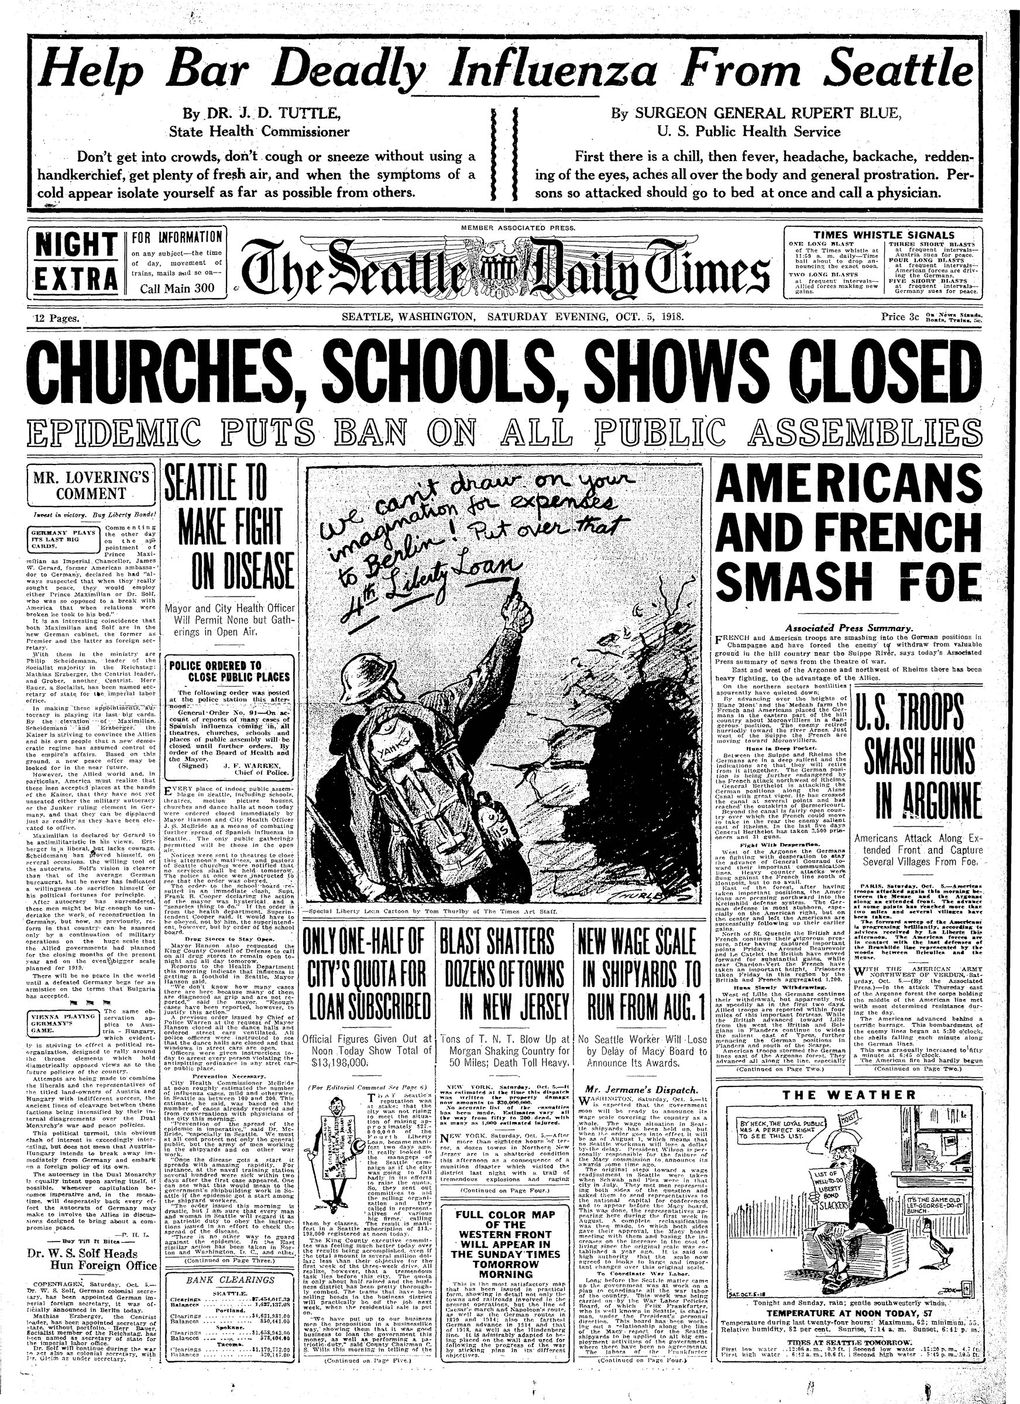 The front page of the Oct. 5, 1918 Seattle Daily Times.  